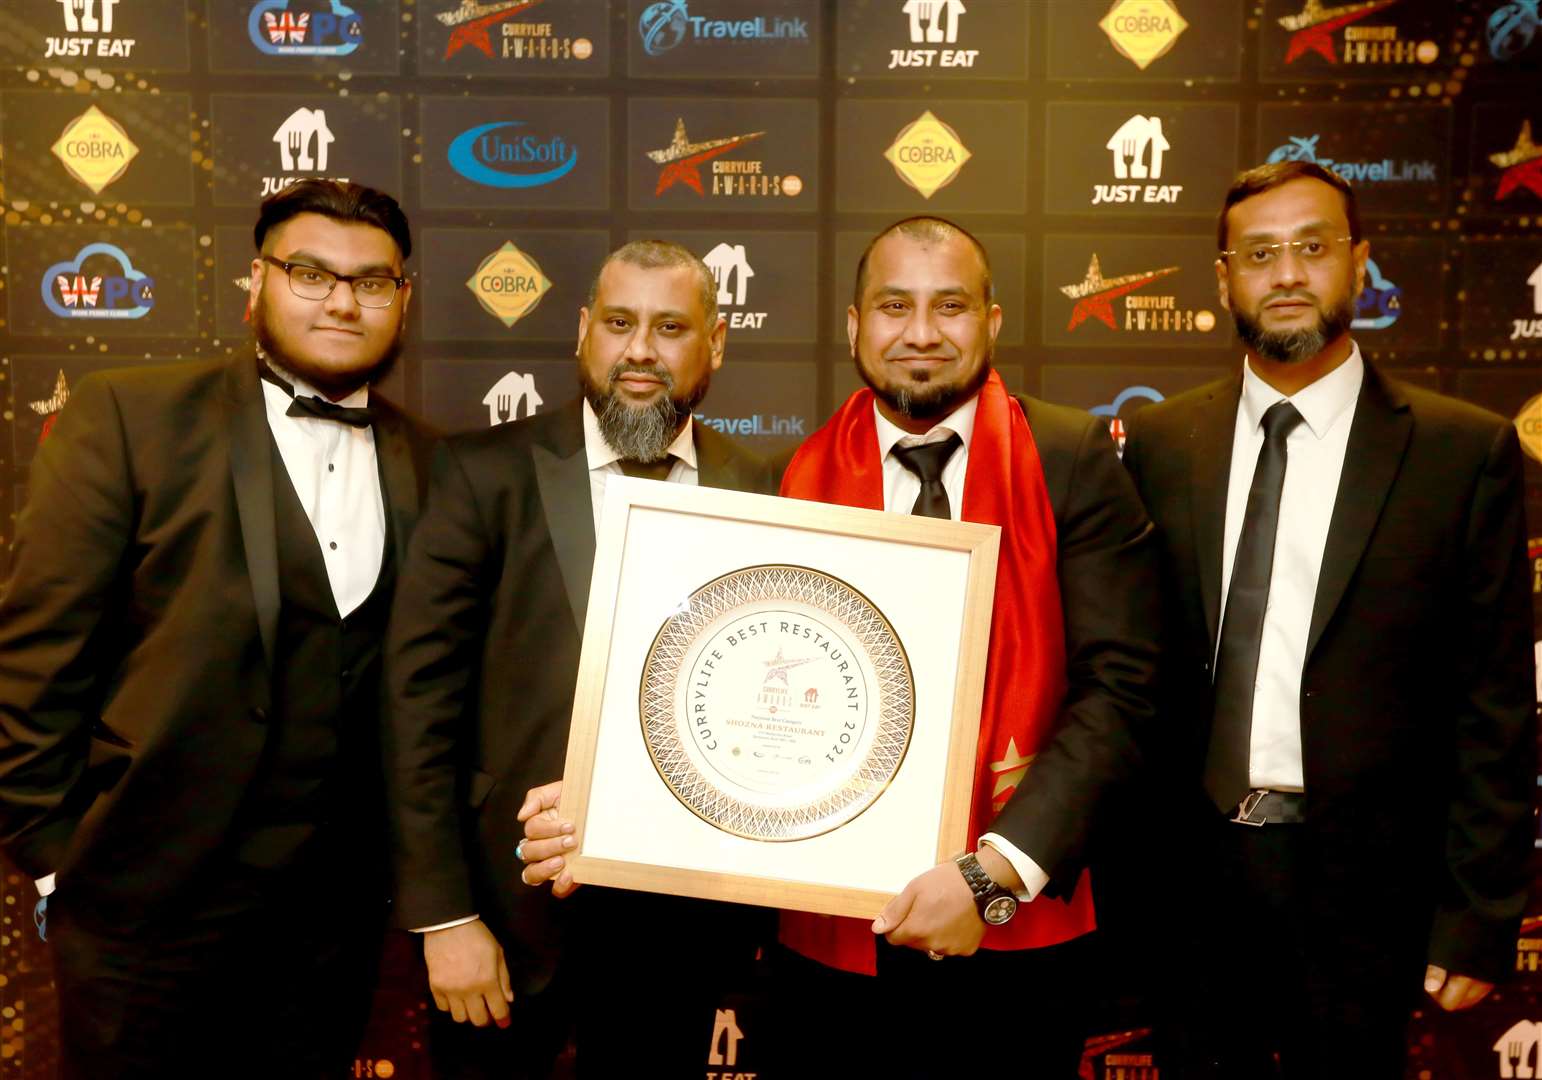 From left to right: Raffe Ahmed, Jalal Ahmed, Jamal Ahmed and Rose Ahmed from Shozna Restaurant with their award. Photo: Curry Life Magazine